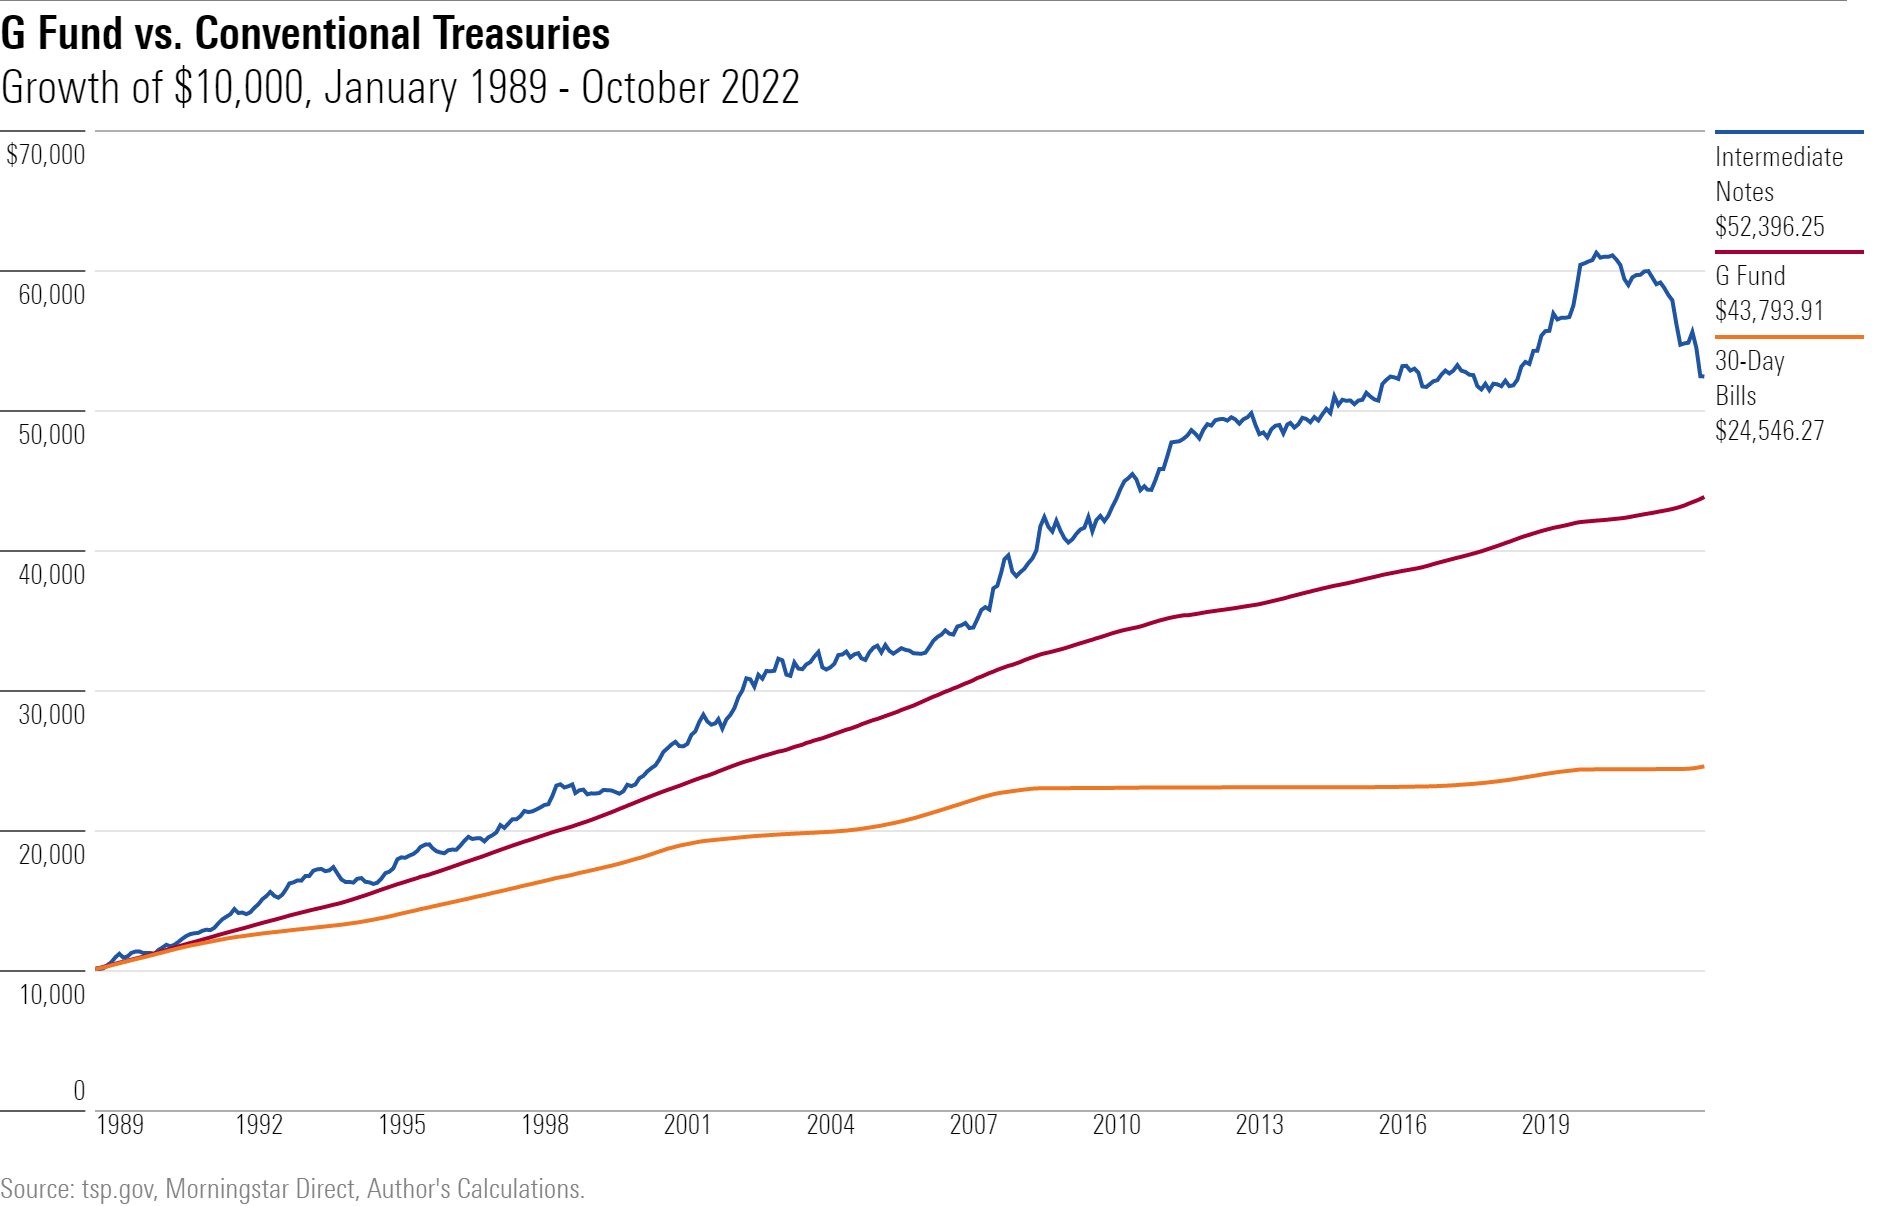 A line chart showing the Growth of $10,000 for 1) G Fund, 2) 30-day Treasury bills, and 3) intermediate-term Treasuries, from January 1989 through October 2022.